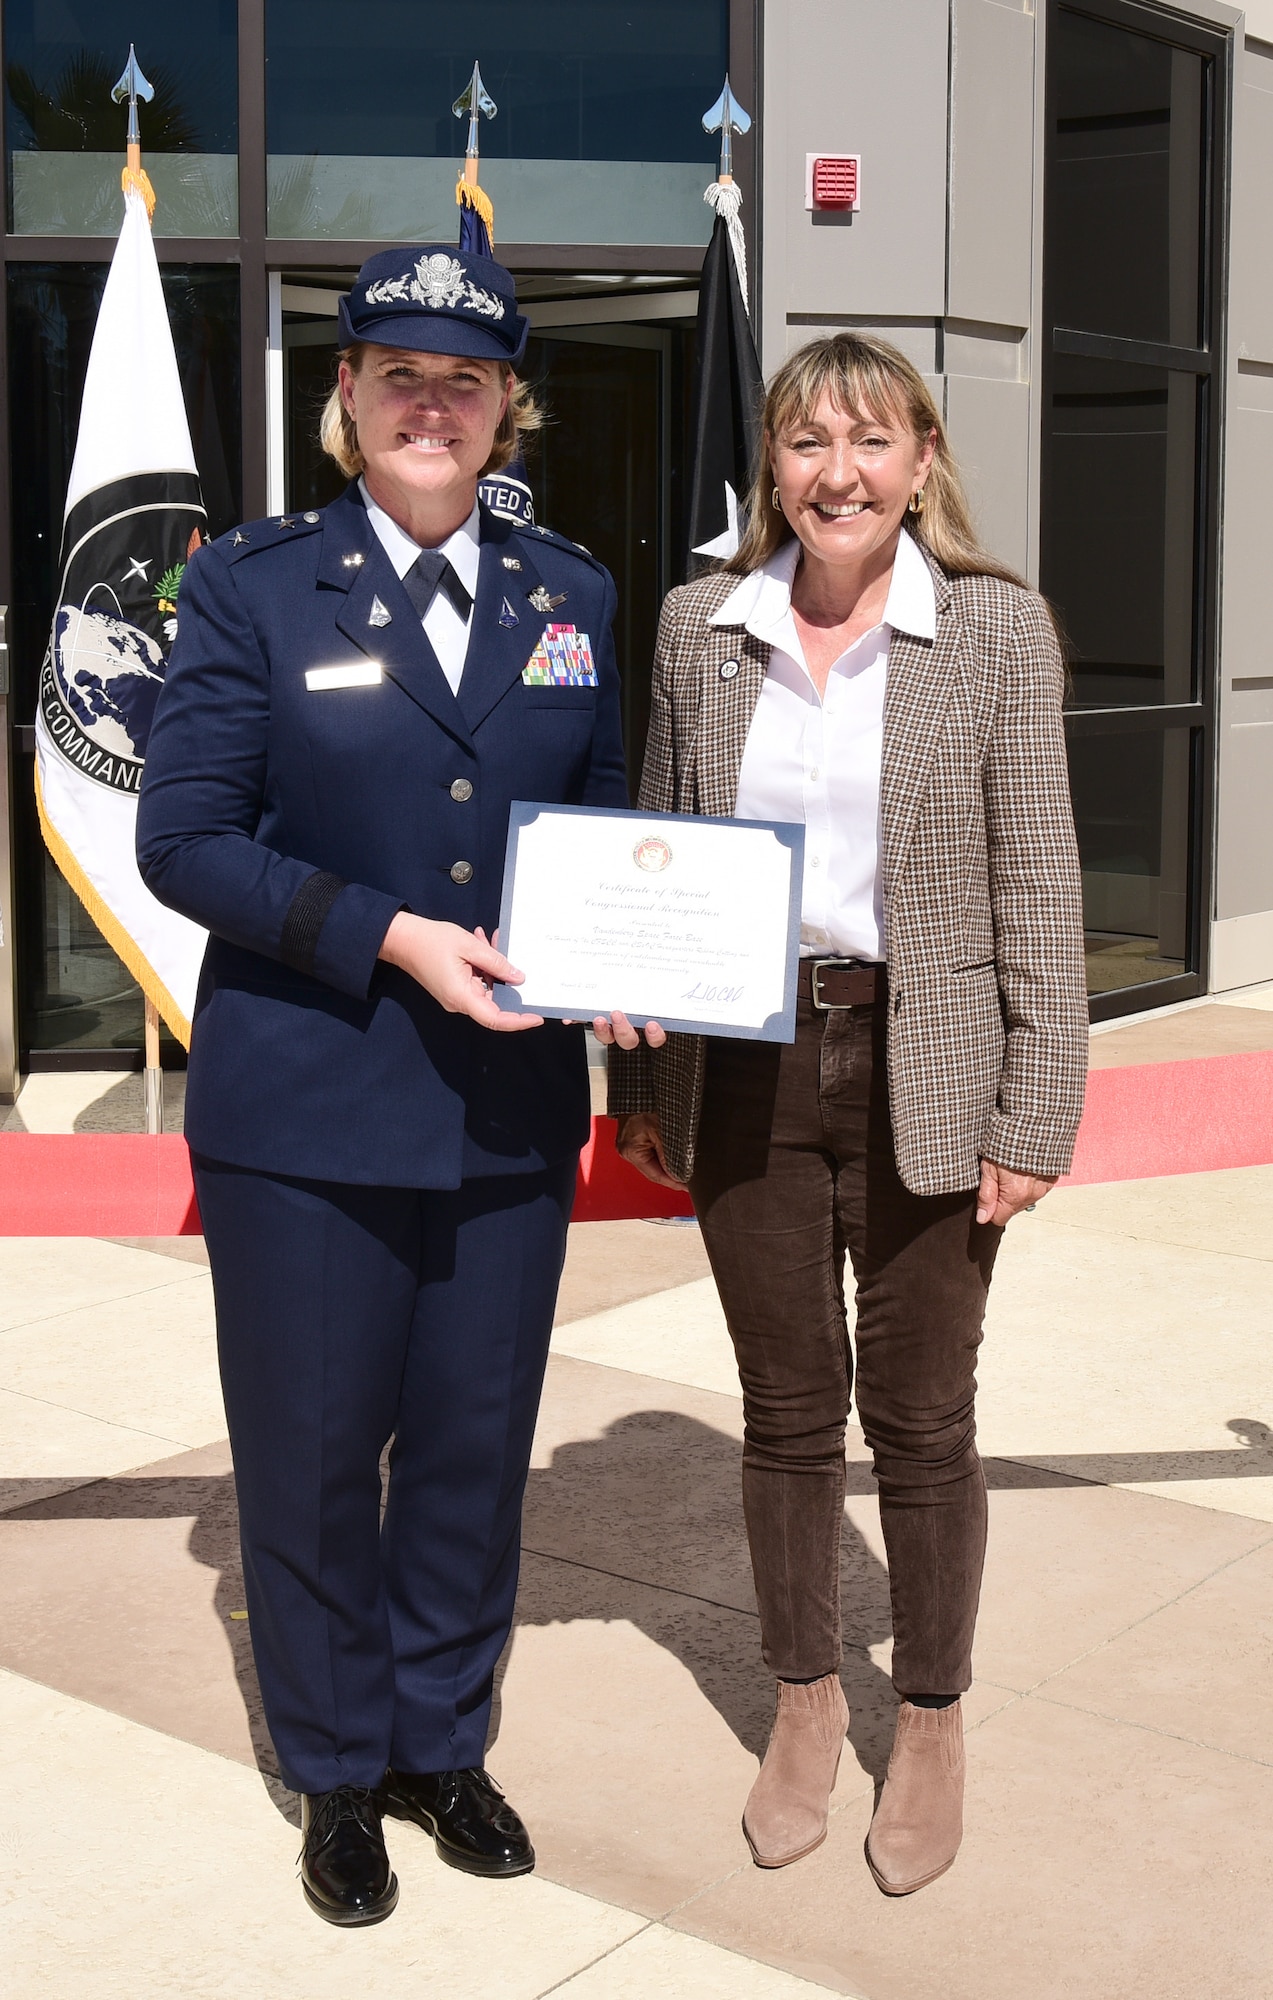 Wendy Motta (at right), a representative for Congressman Salud Carbajal (D-Santa Barbara), presents a Certificate of Special Congressional Recognition to Maj. Gen DeAnna Burt, Combined Force Space Component Command commander, at the ribbon-cutting ceremony for the new co-located CFSCC headquarters and Combined Space Operations Center building at Vandenberg Space Force Base, Calif., Aug. 2, 2021.